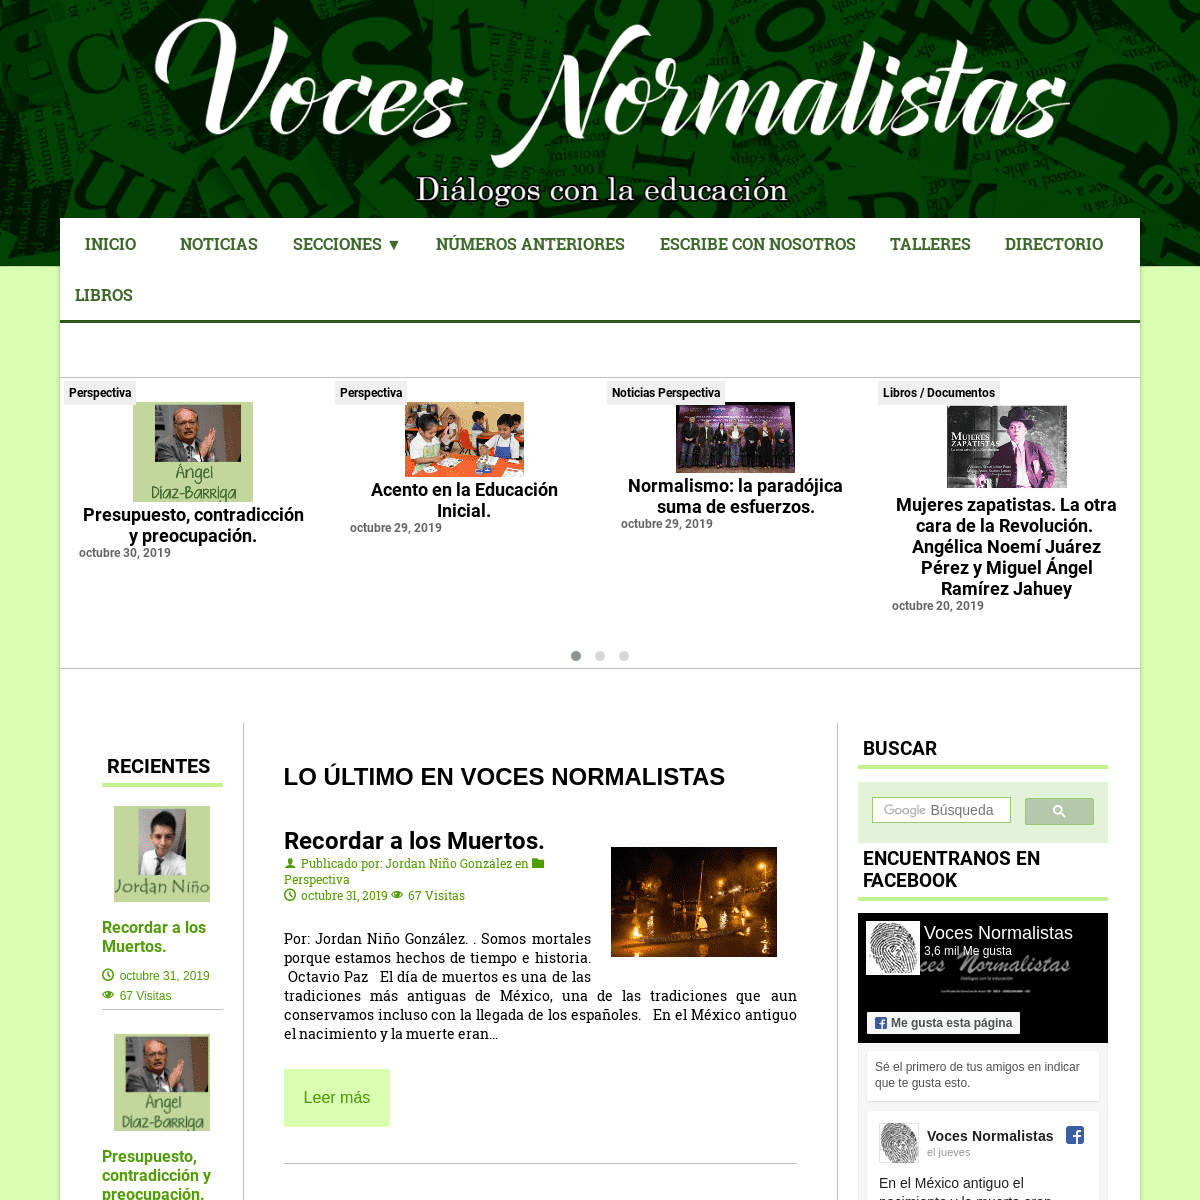 A complete backup of vocesnormalistas.org